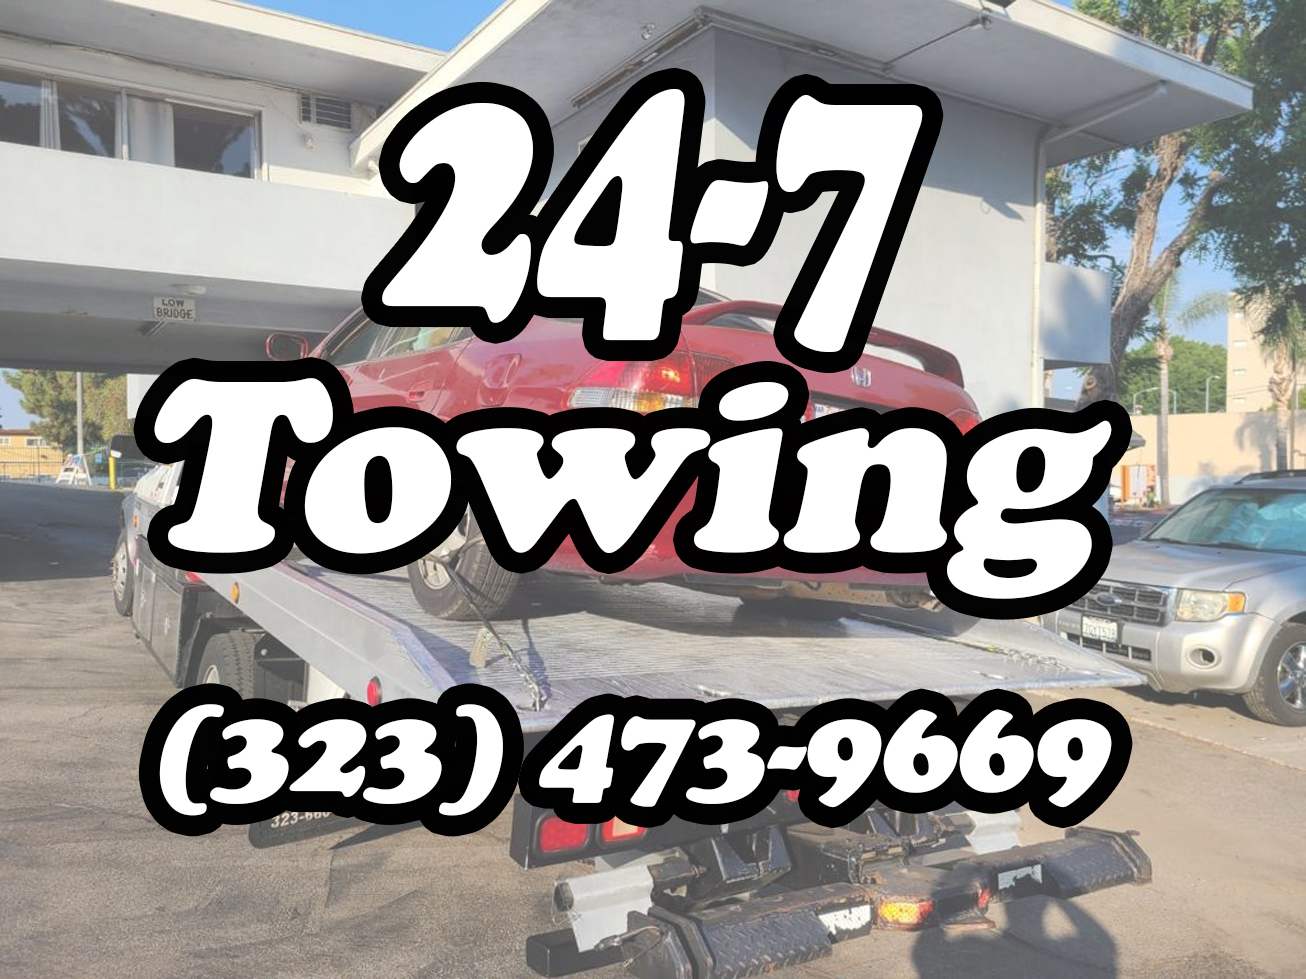 24-7 Towing